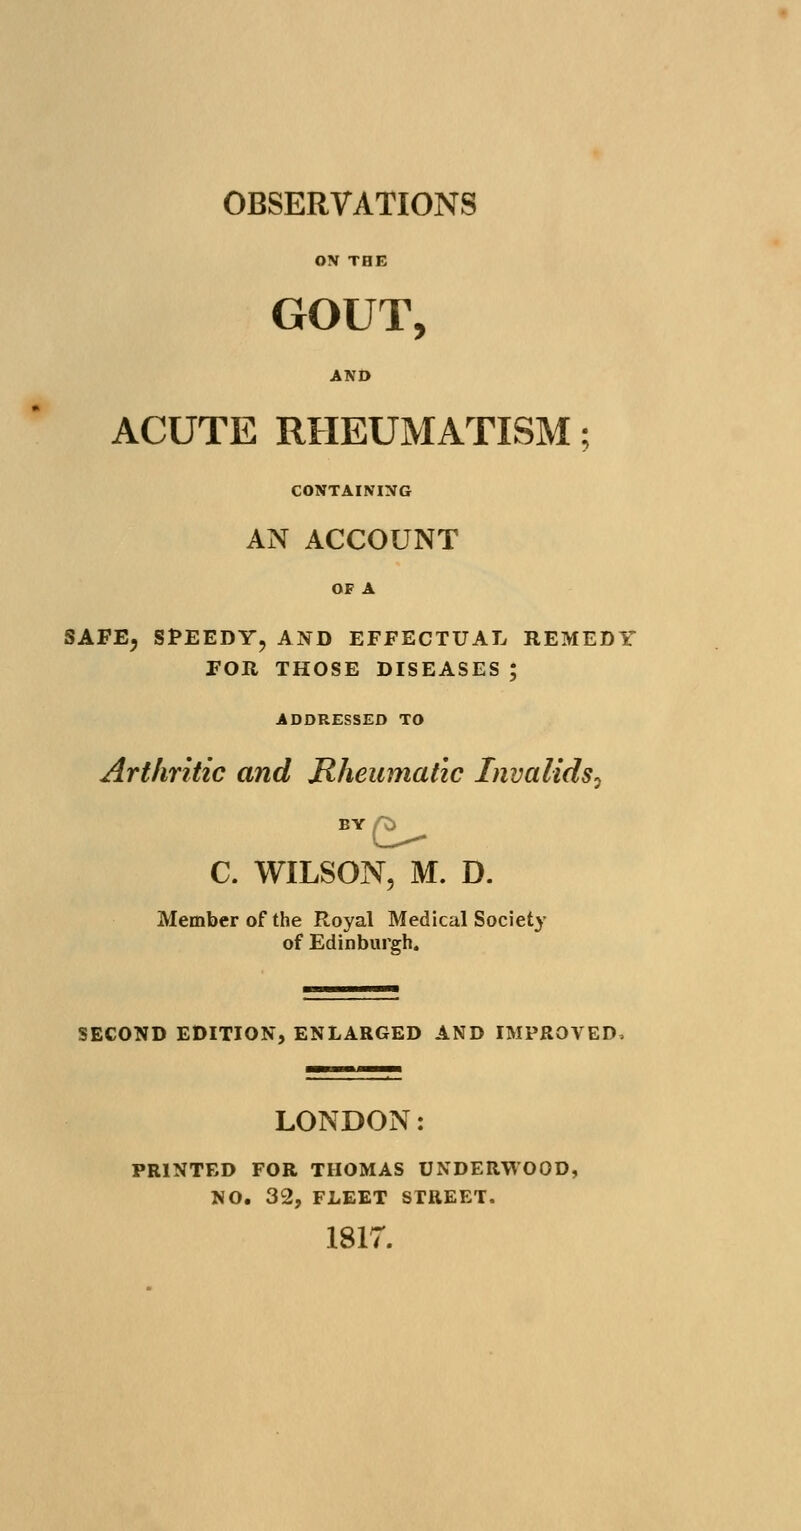 ON THE GOUT, AND ACUTE RHEUMATISM; CONTAINING AN ACCOUNT OF A SAFE, SPEEDY,AND EFFECTUAL REMEDY FOR THOSE DISEASES ; ADDRESSED TO Arthritic and Rheumatic Invalids^ C. WILSON, M. D. Member of the Royal Medical Society of Edinburgh. SECOND EDITION, ENLARGED AND IMPROVED, LONDON: PRINTED FOR THOMAS UNDERWOOD, NO. 32, FLEET STREET. 1817.